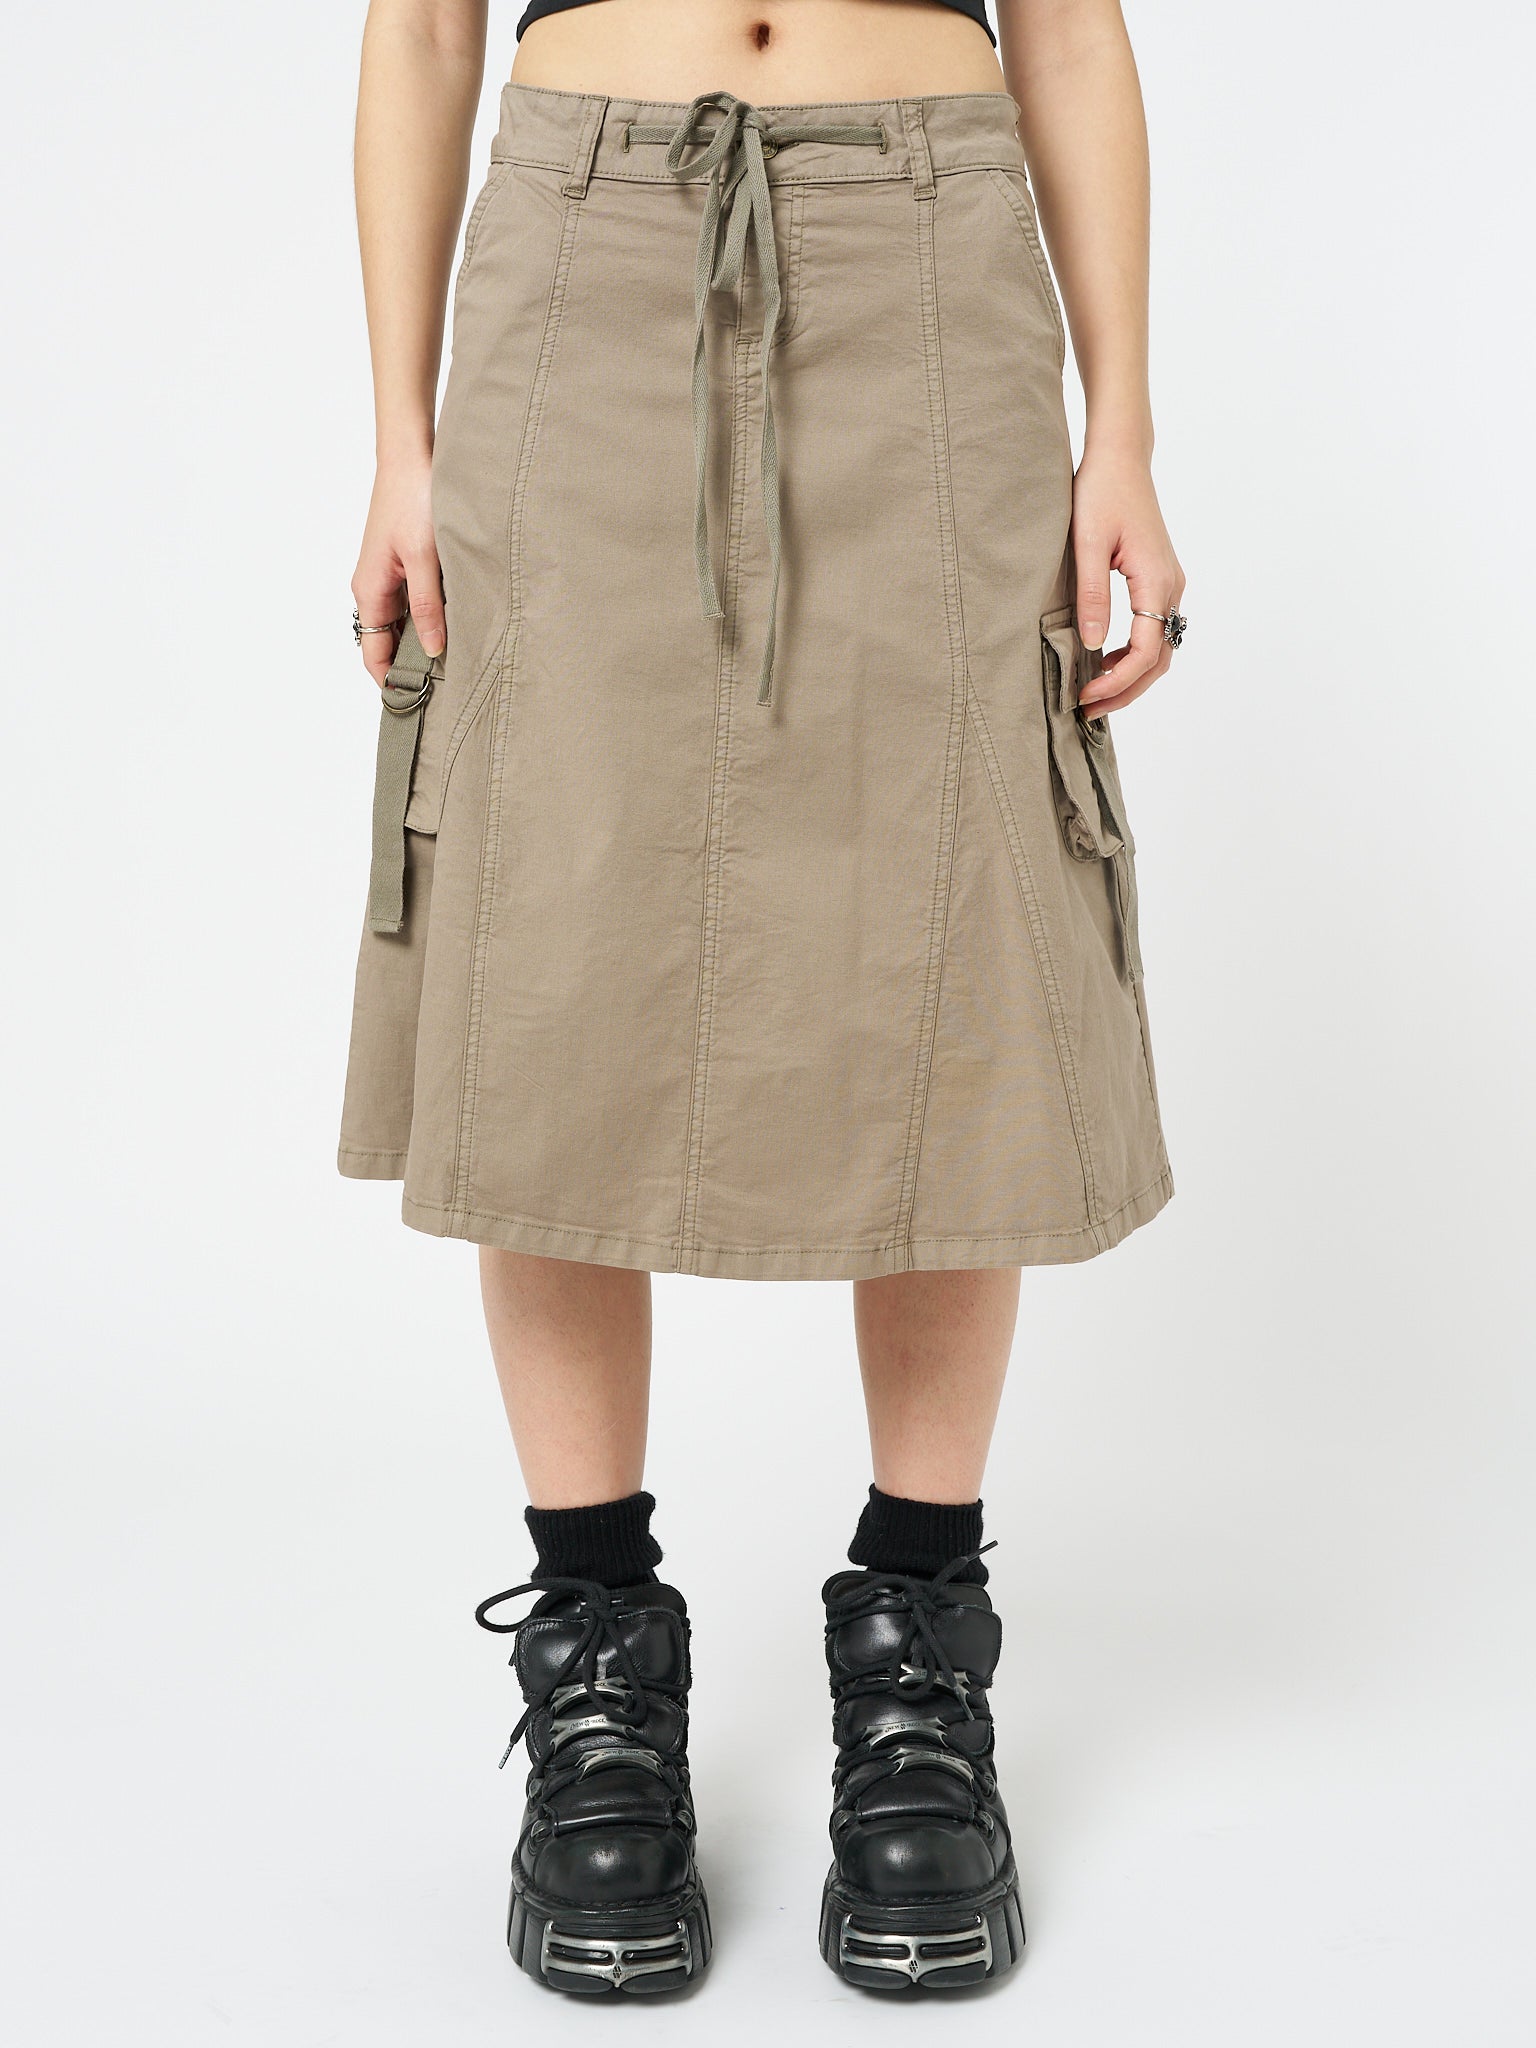 Brown cargo midi skirt named Fae by Minga London, offering a stylish and versatile option with its utilitarian-inspired design and neutral beige color.